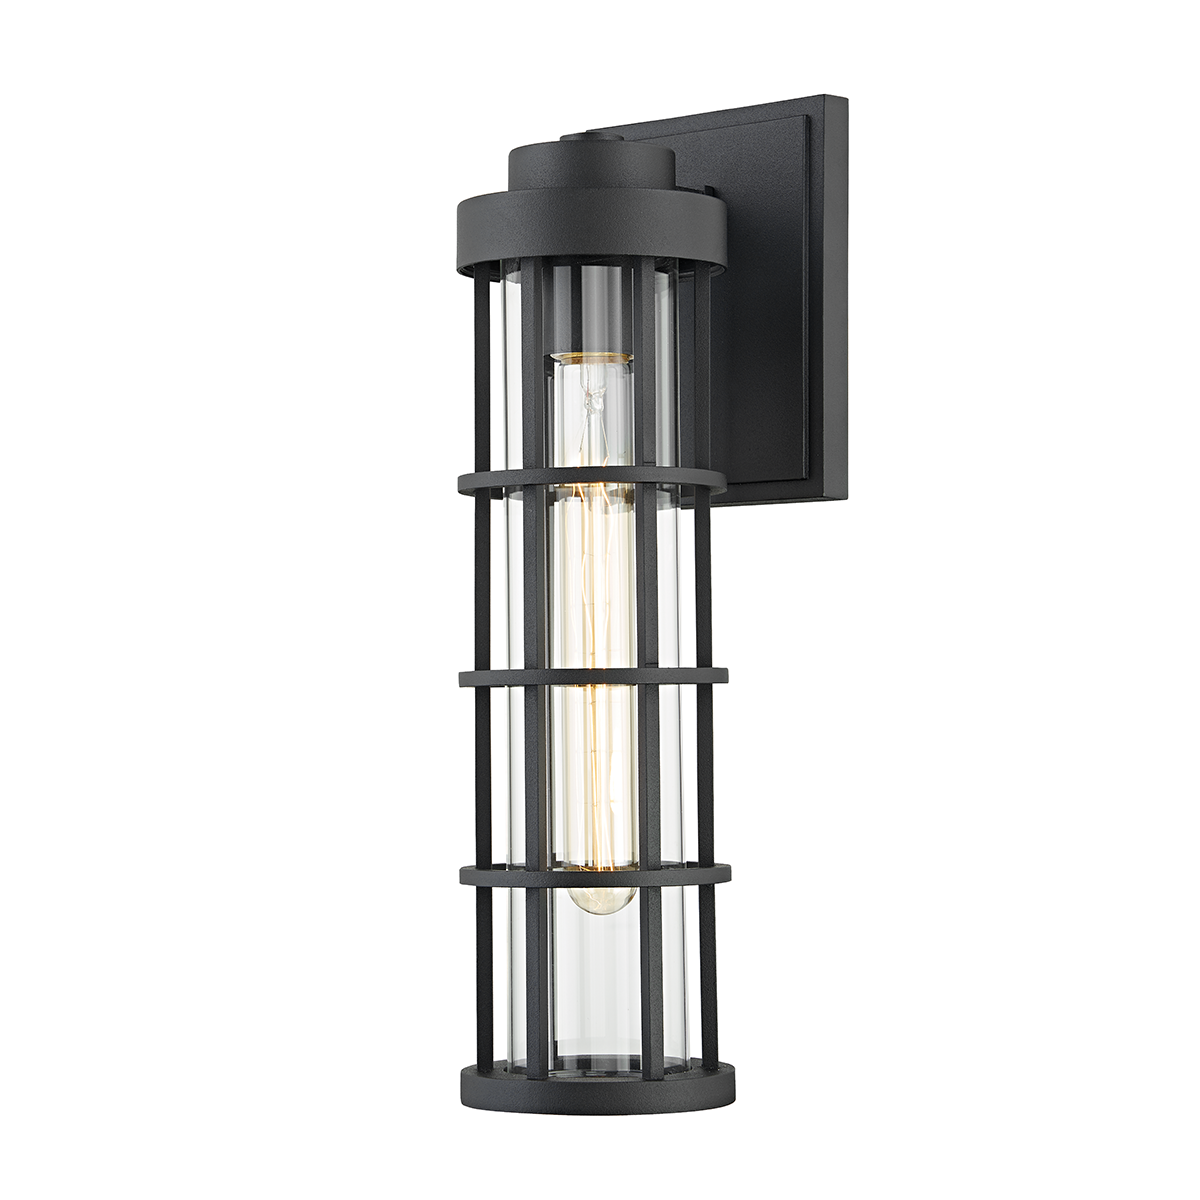 Troy Lighting 1 LIGHT LARGE EXTERIOR WALL SCONCE B2042 Outdoor l Wall Troy Lighting TEXTURE BLACK  